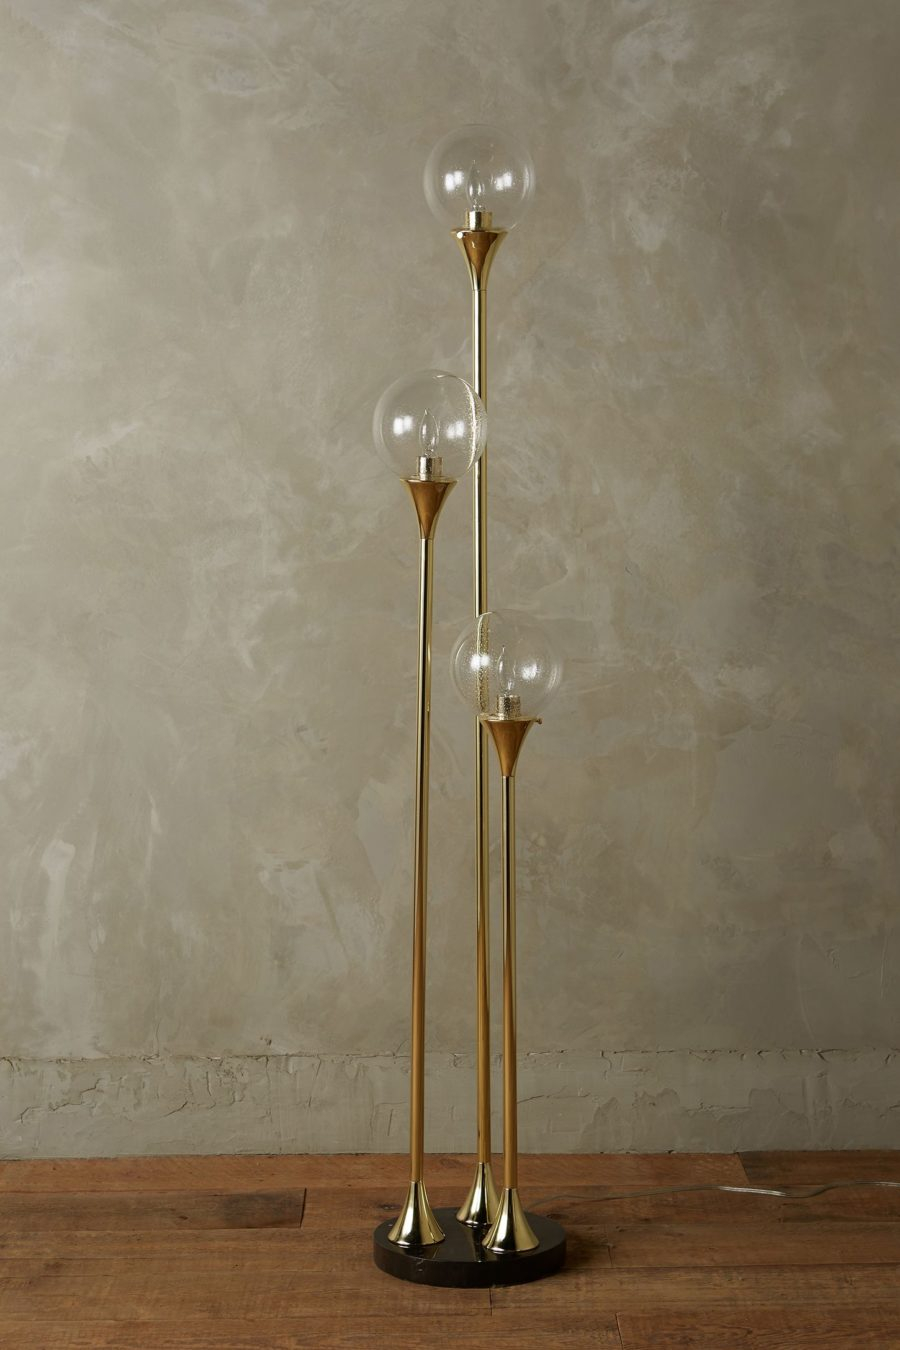 Unique Floor Lamps White Disacode Home Design From regarding size 900 X 1350